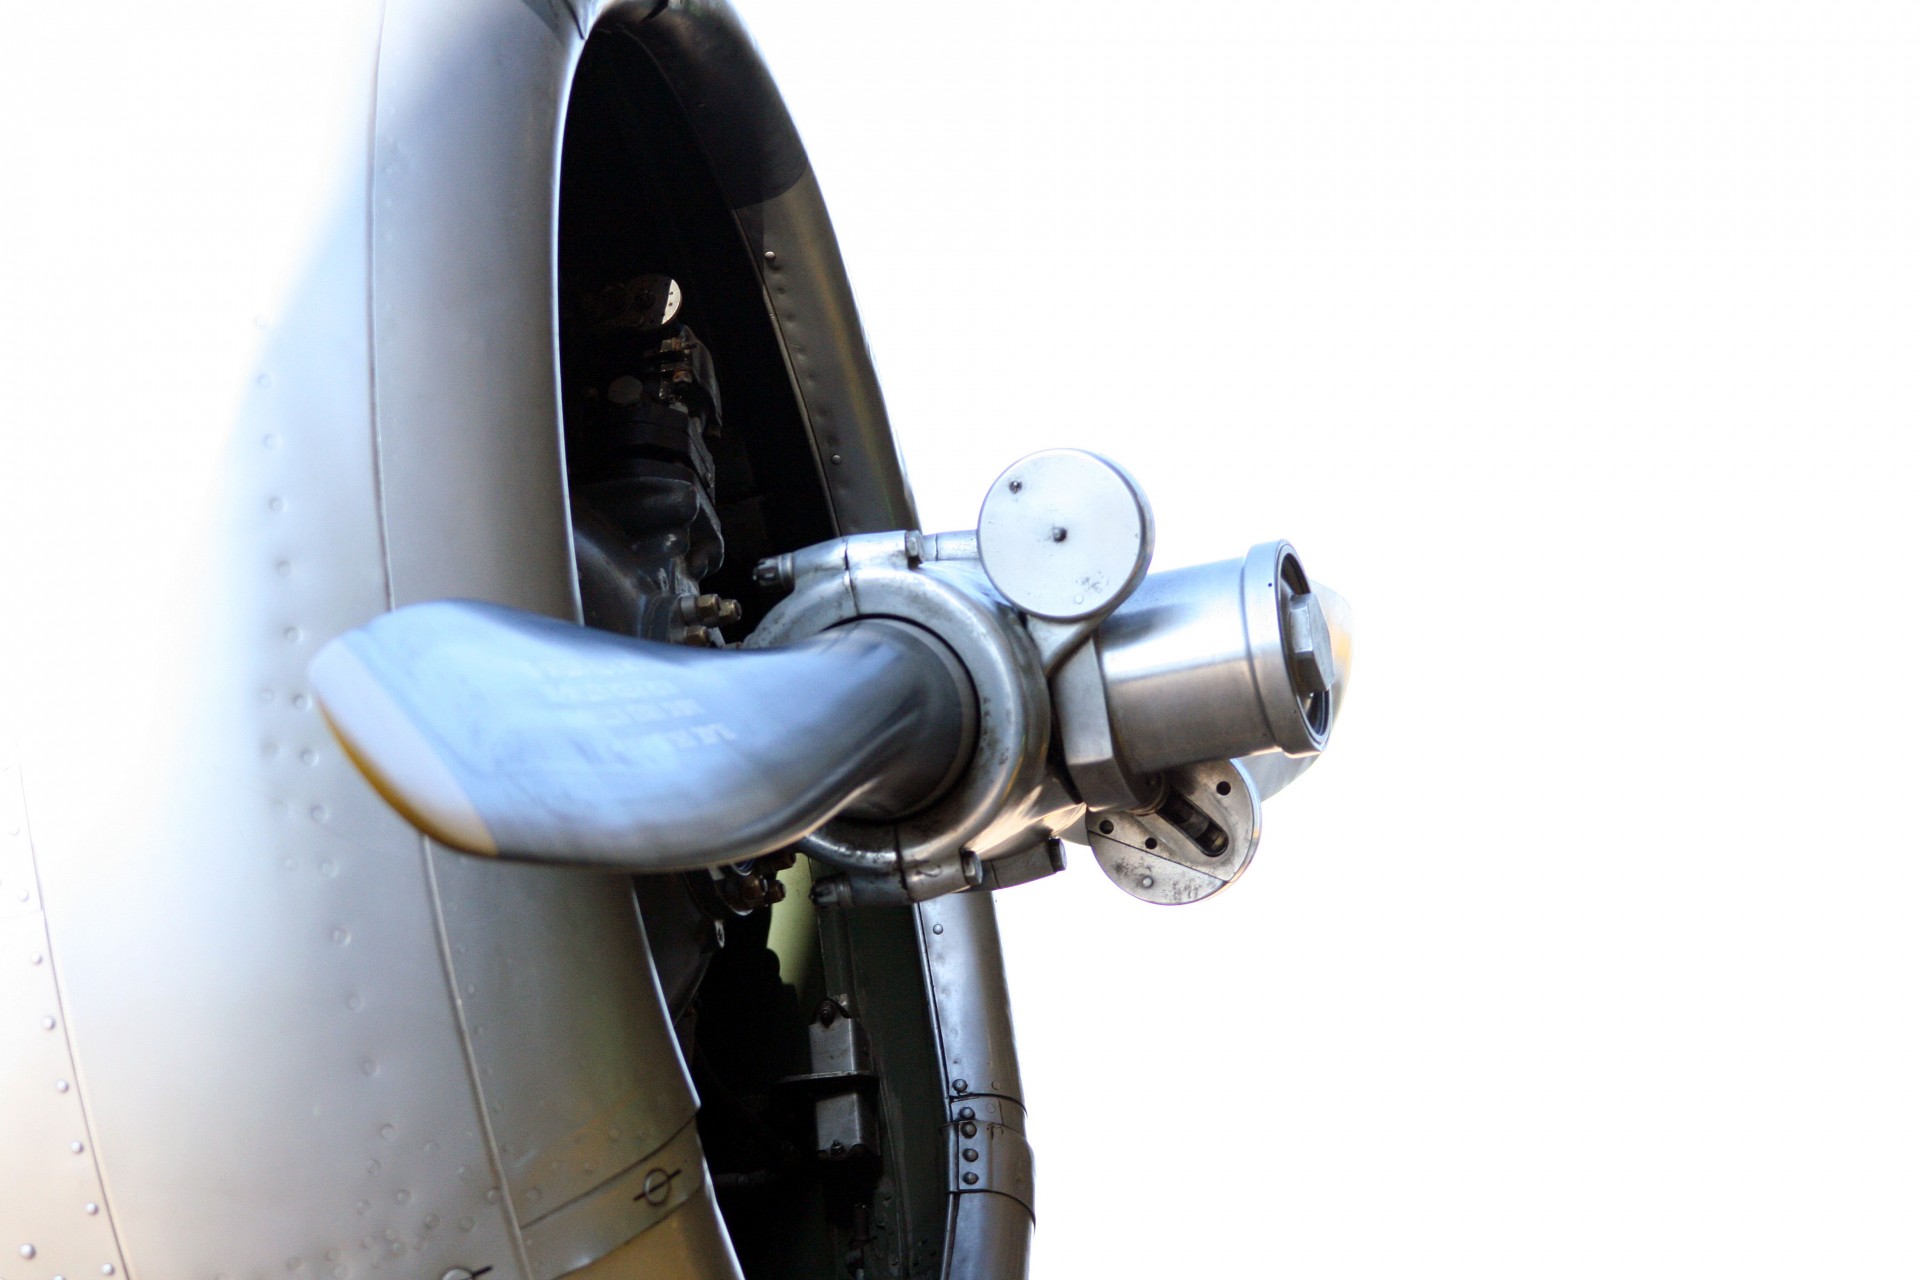 Cowling And Propeller Of Harvard